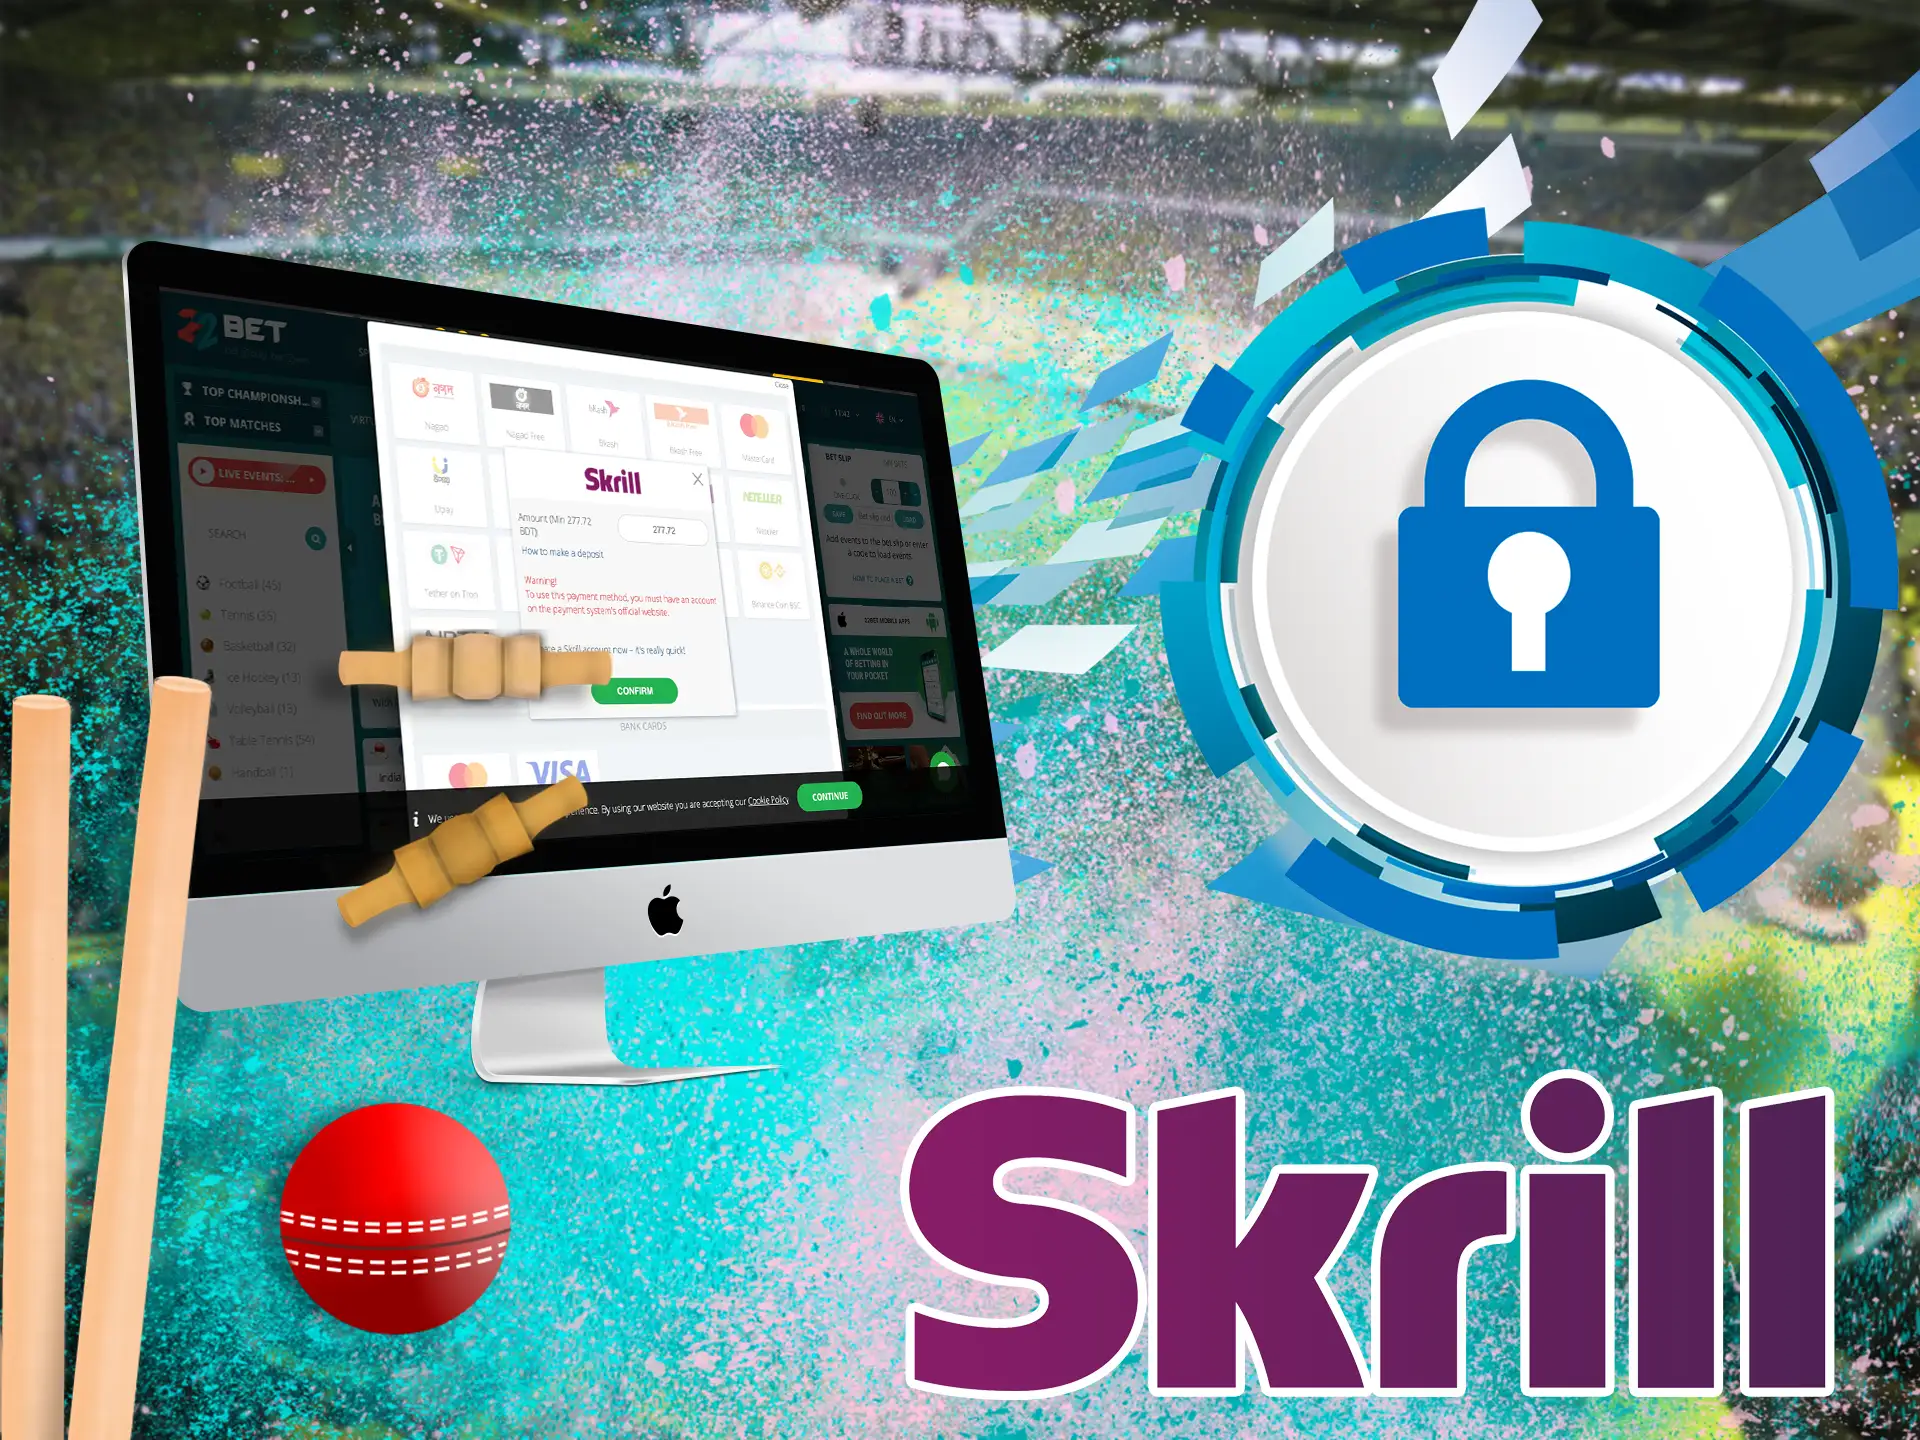 Skrill will maximize the protection of personal data and payments.